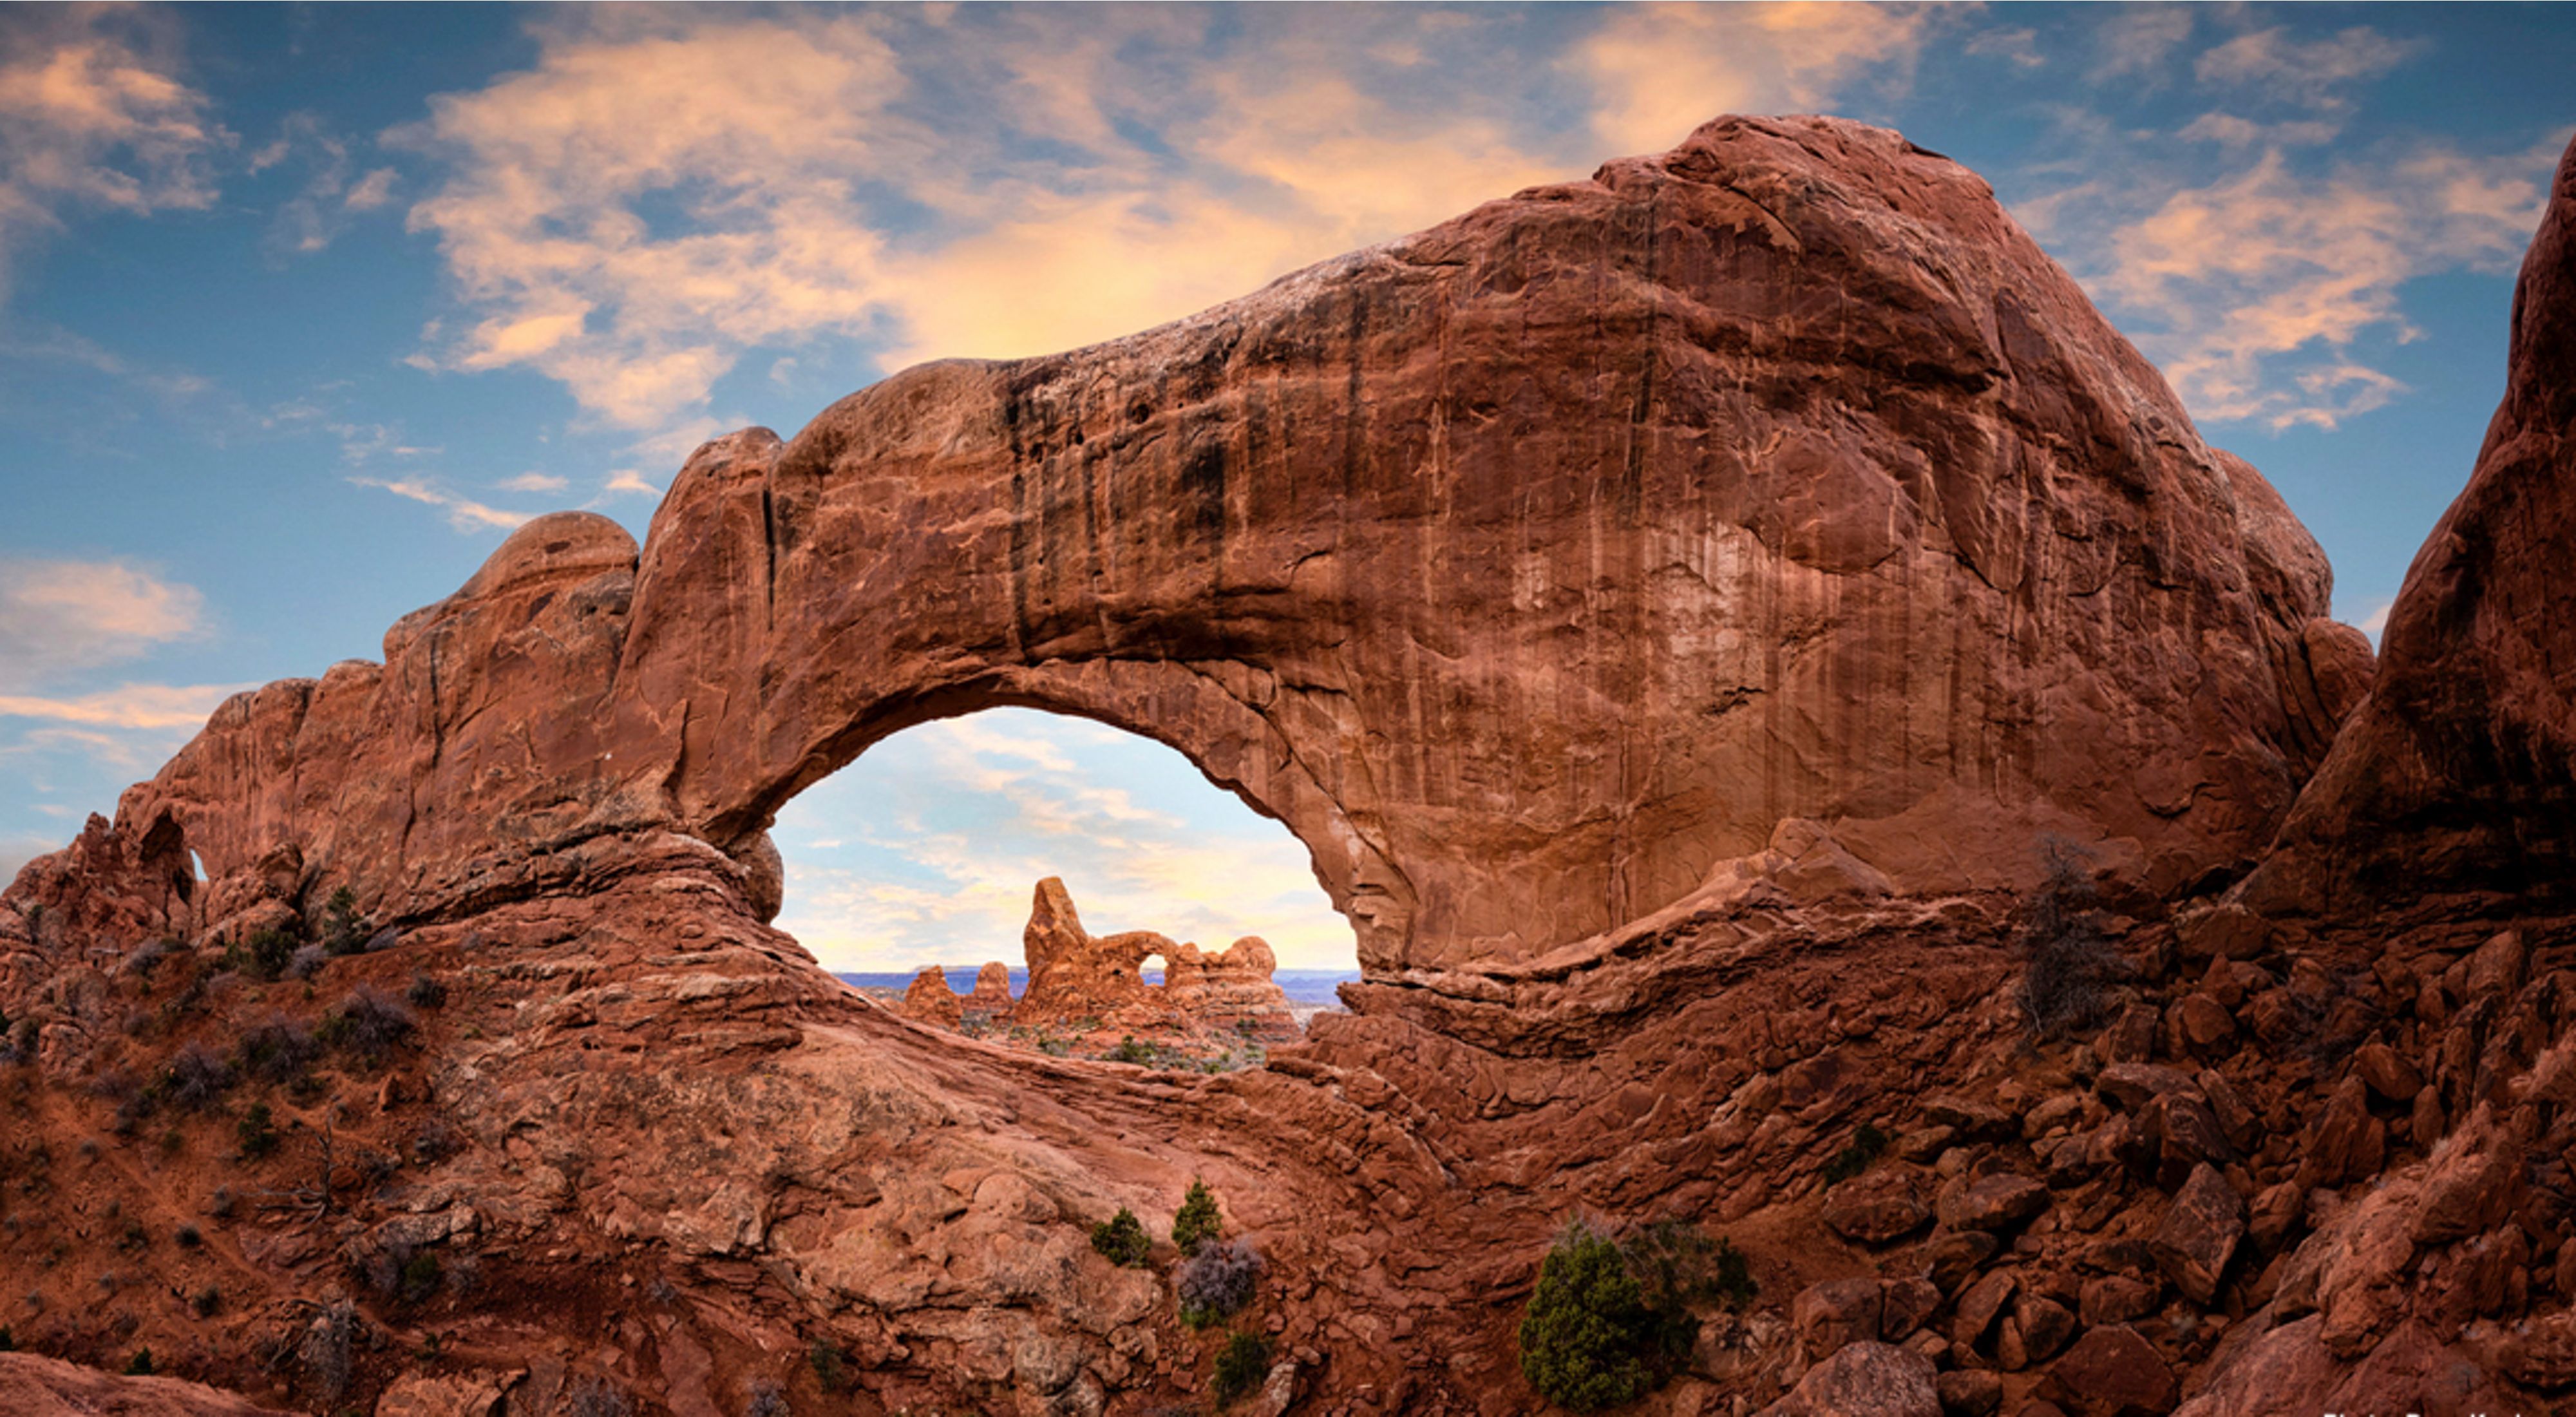 Sunrise at Arches National Park. Golden light touches rugged rock formations.